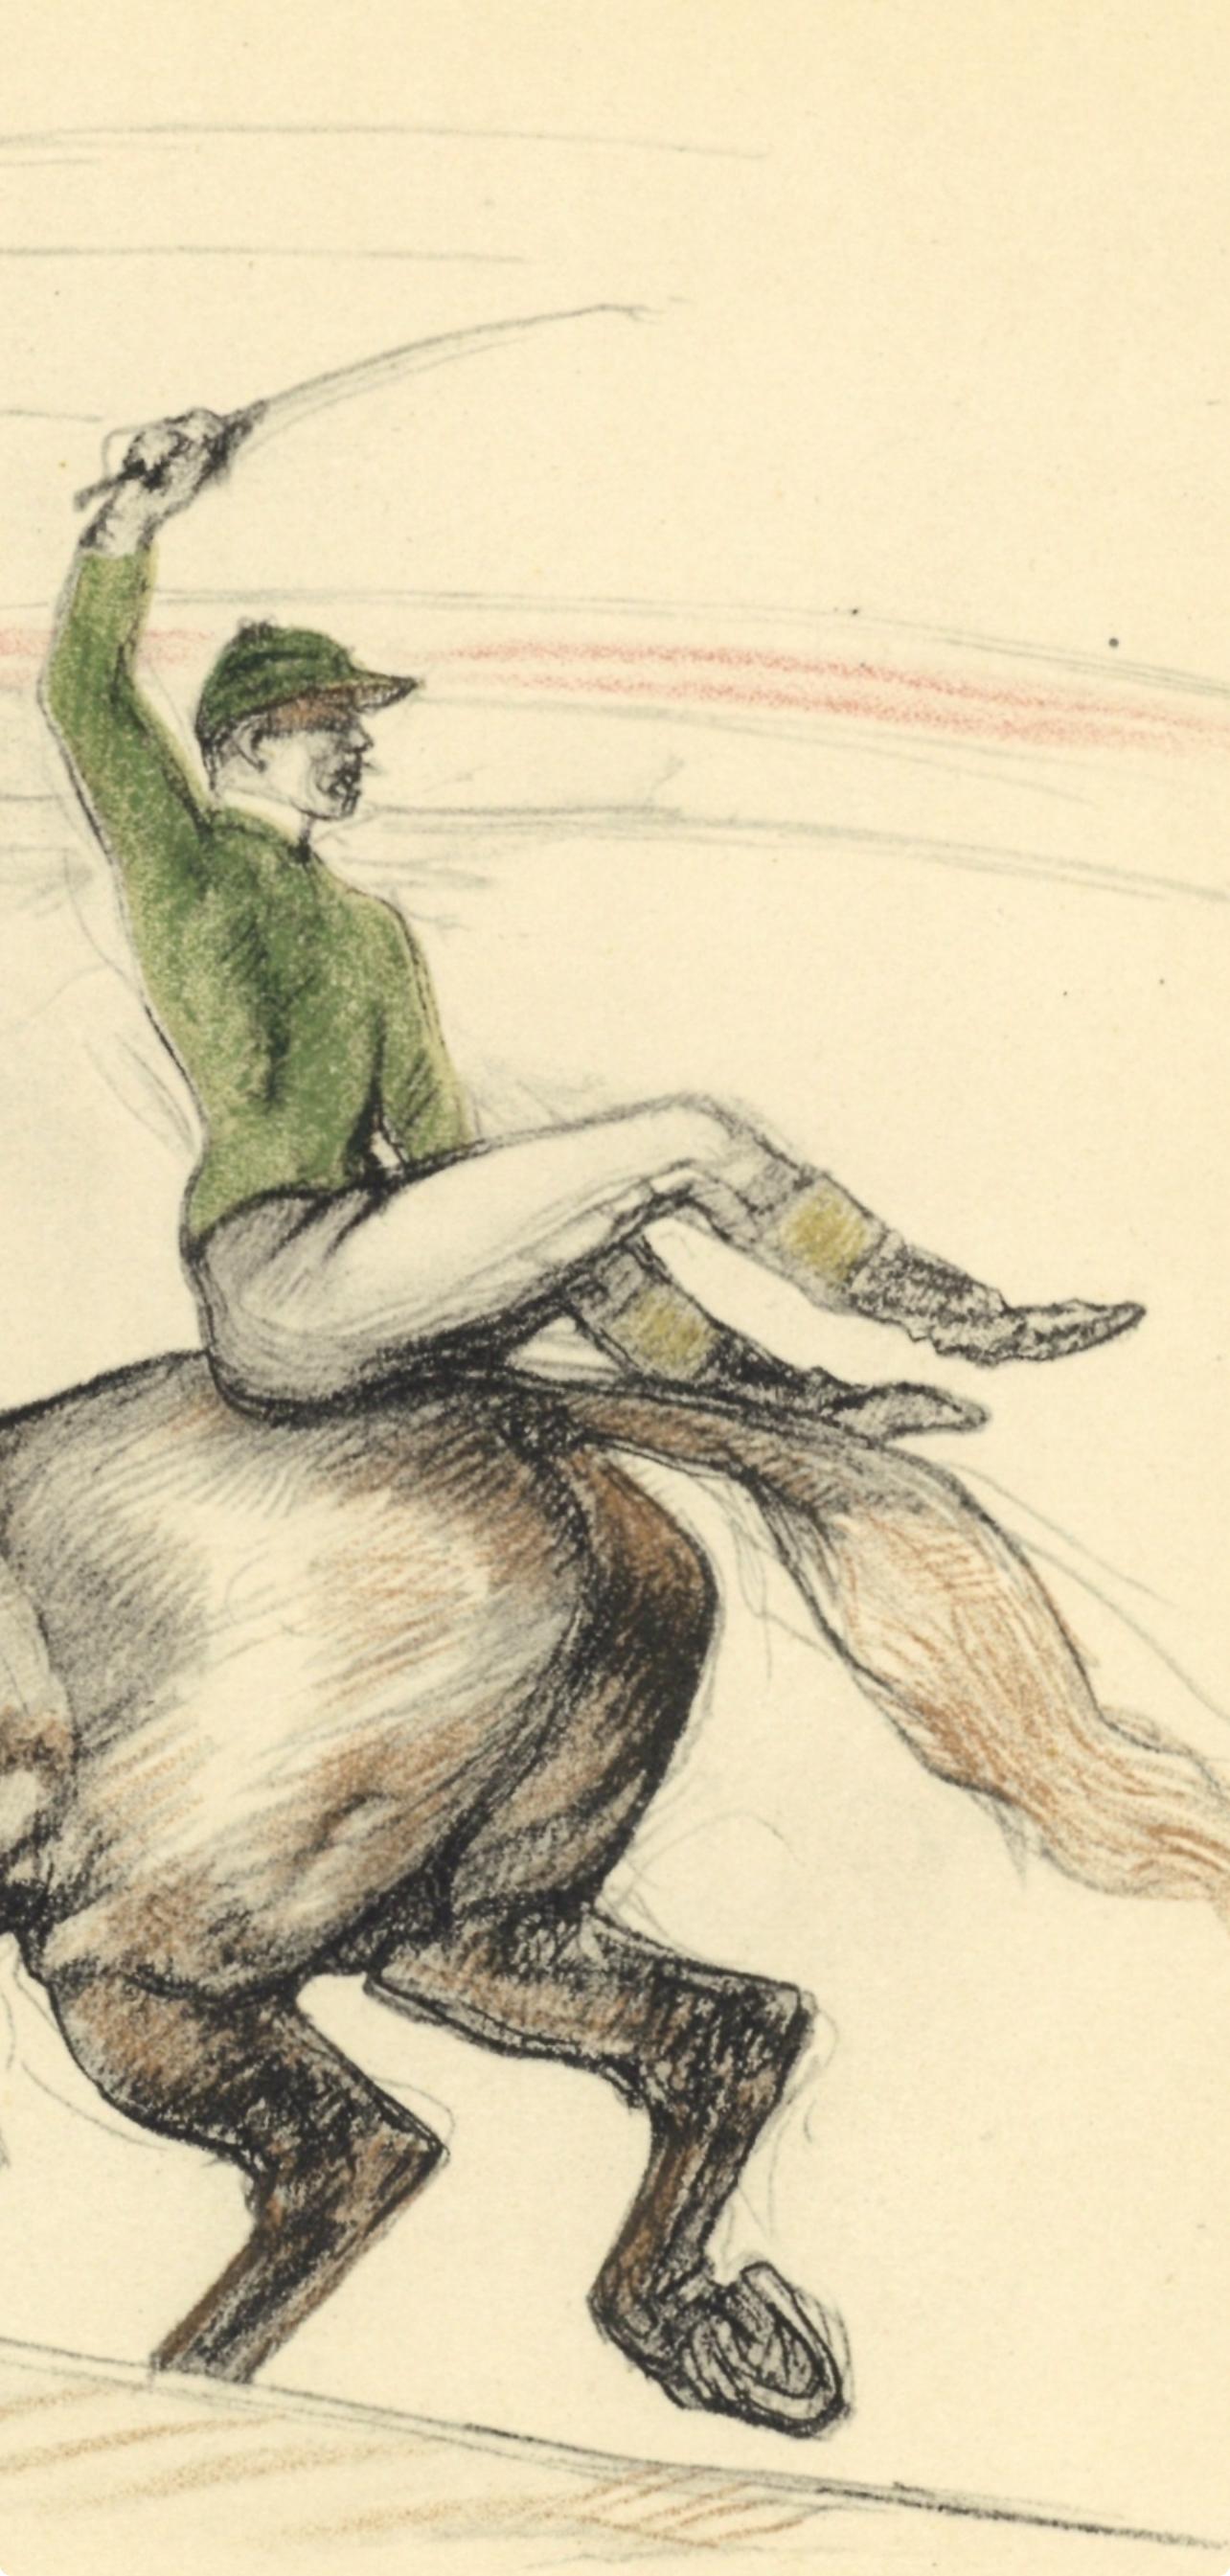 Lithograph on wove paper.  Unsigned and unnumbered, as issued. Good Condition; never framed or matted. Notes: From the volume, The Circus by Toulouse-Lautrec, 1952. Published the Paris Book Center, New York and André Sauret, Paris; printed by